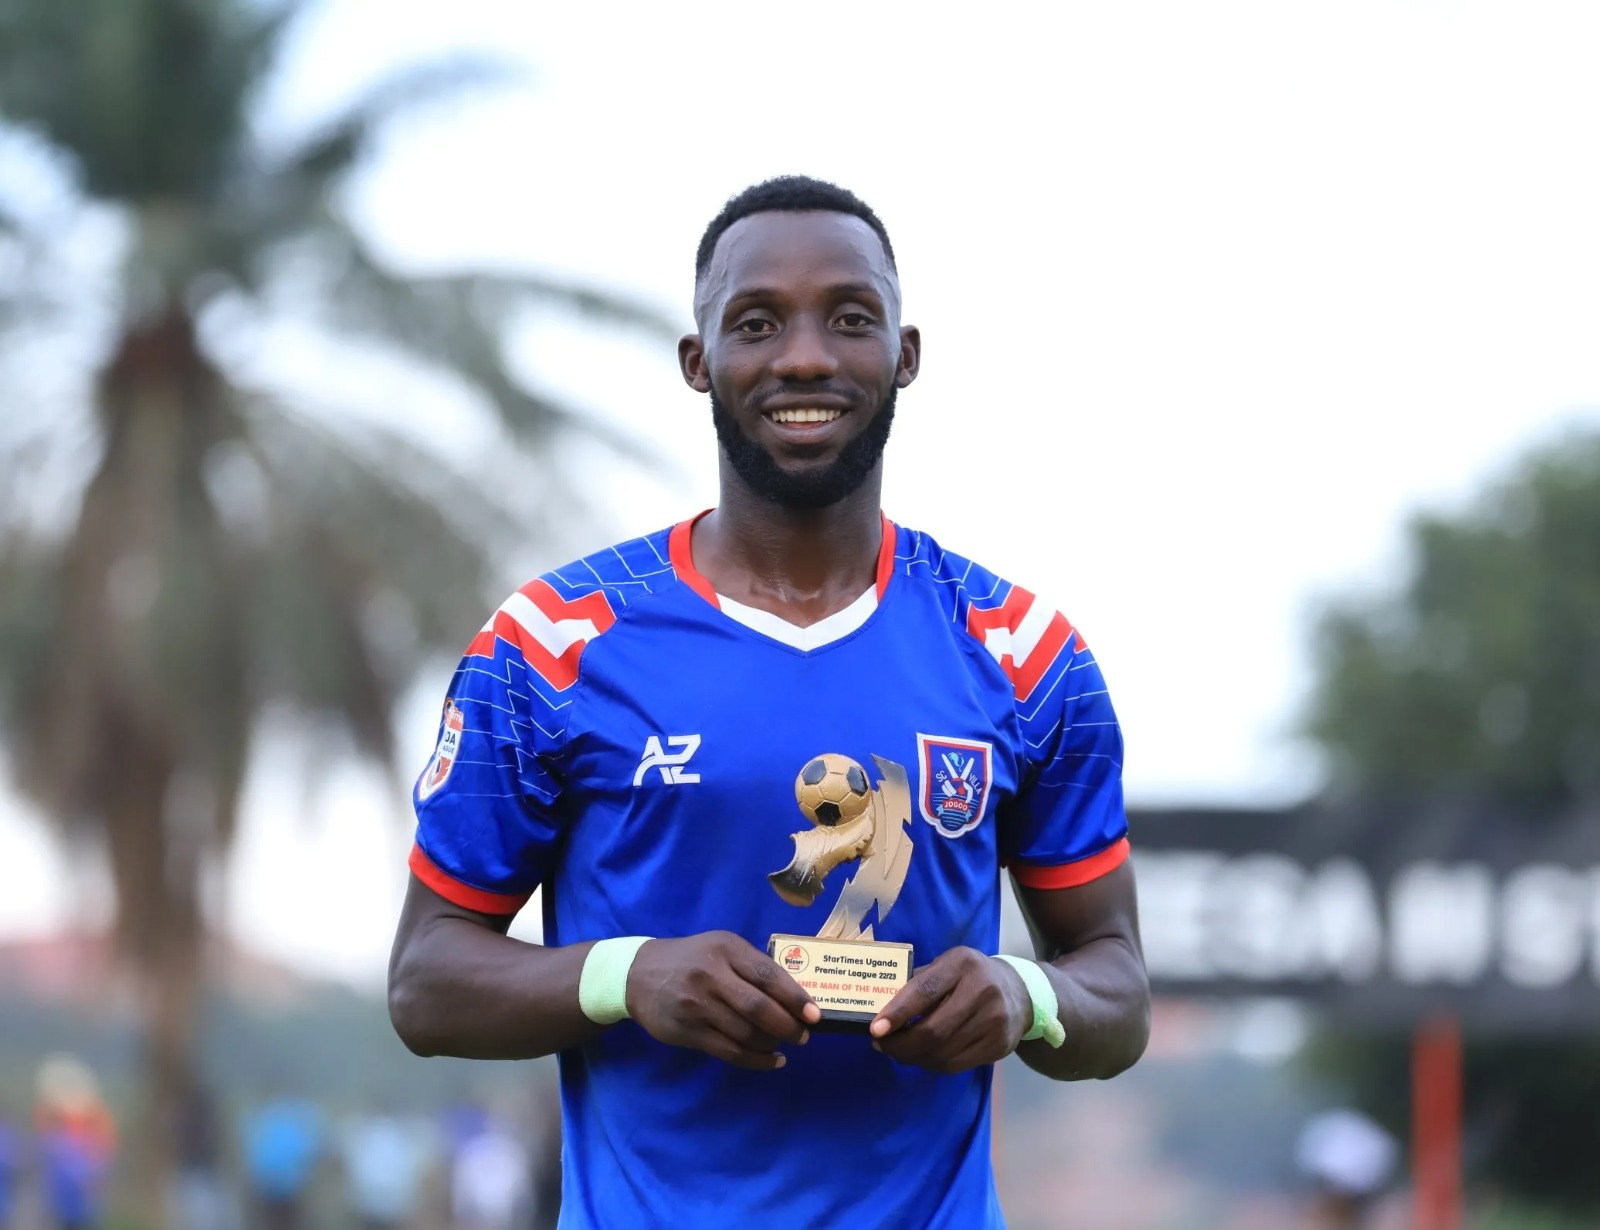 SC Villa's in-form striker Charles Bbaale gets first time national team selection as Uganda Cranes prepares to take on Algeria in the CAF qualifiers